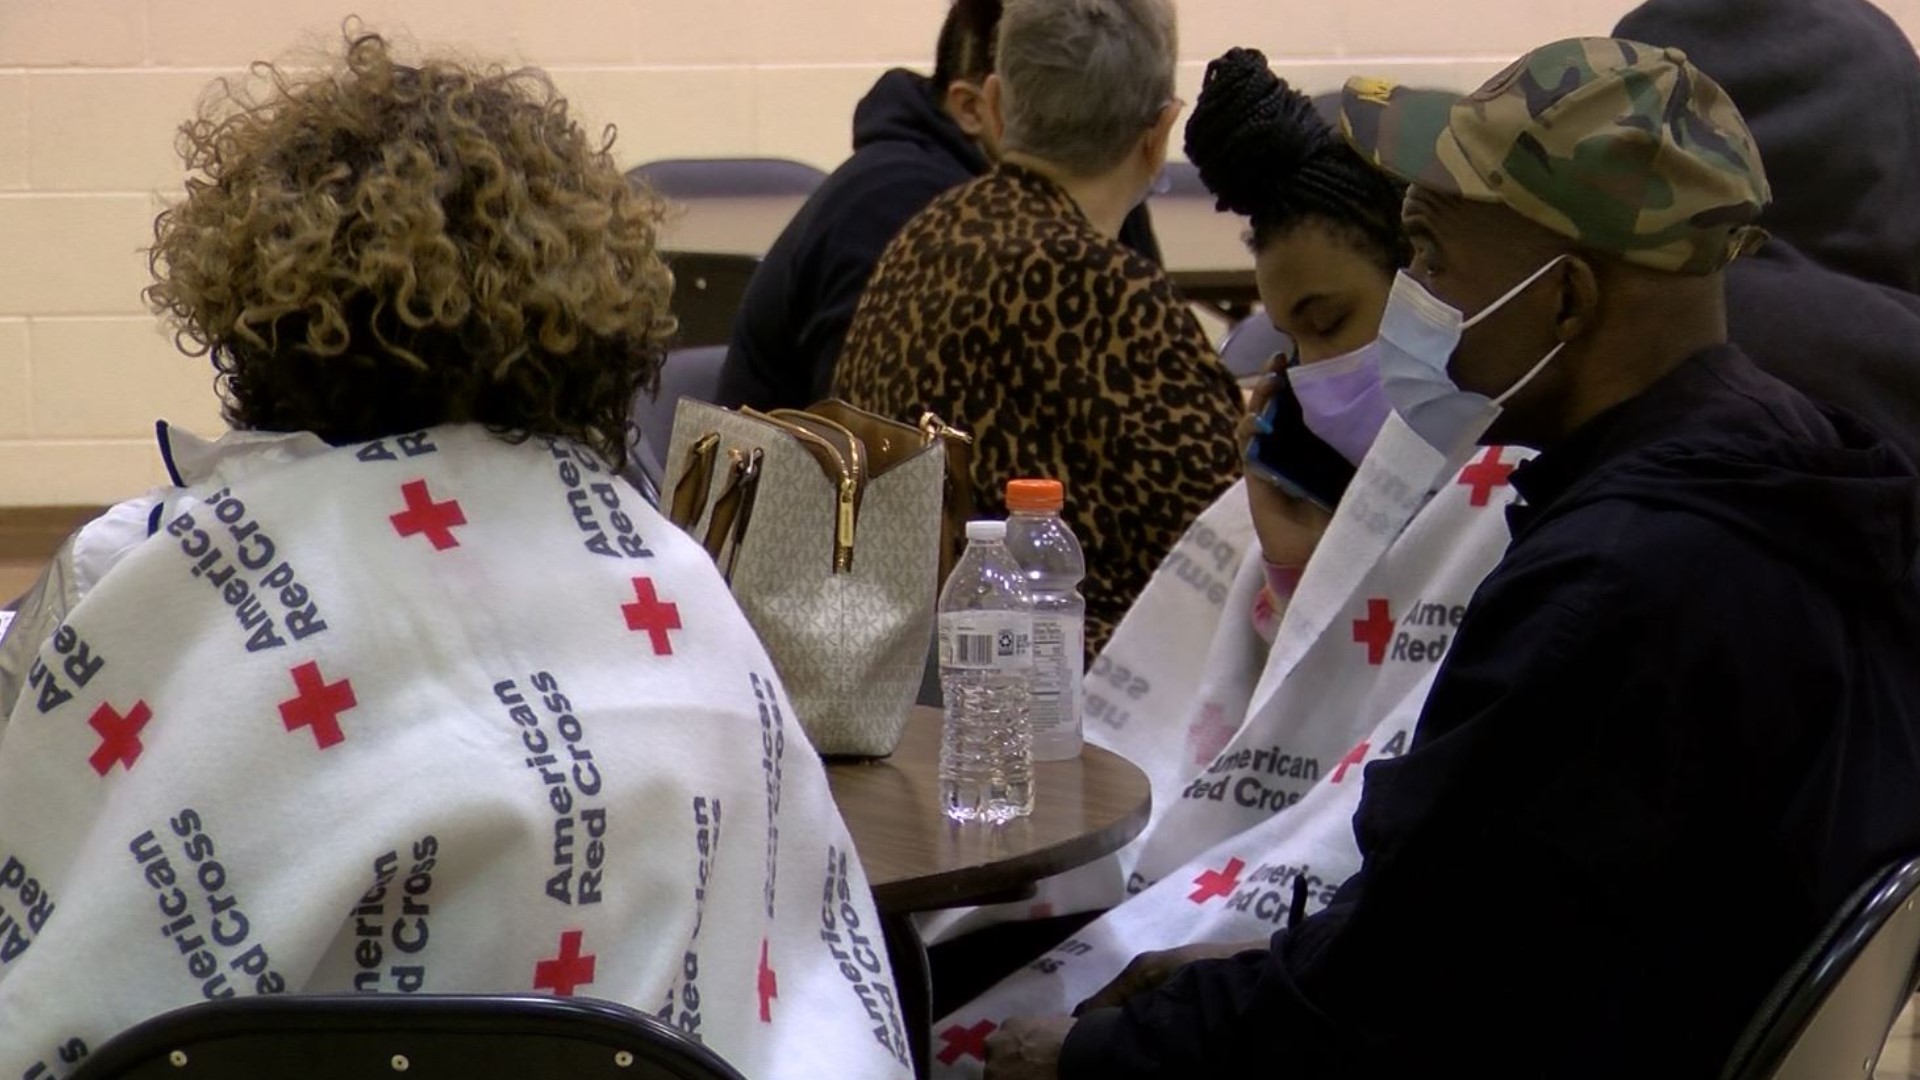 American Red Cross volunteers set up a pop-up shelter at Church of the Cross to help those displaced by the fire.